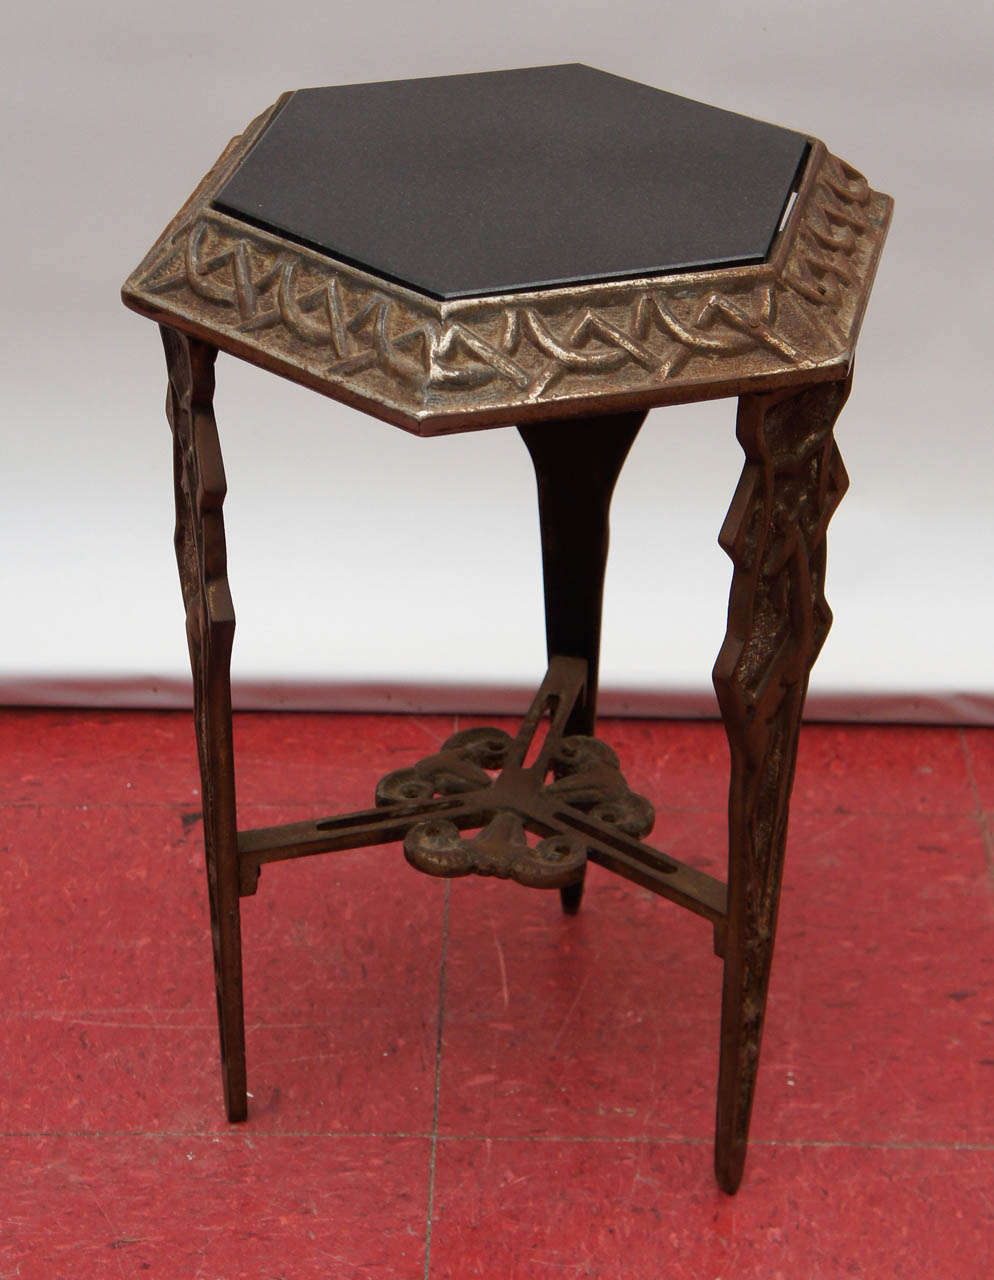 Cast iron figural hexagonal side table with granite inset top, patinated finish, animal figures include a giraffes and rams heads.